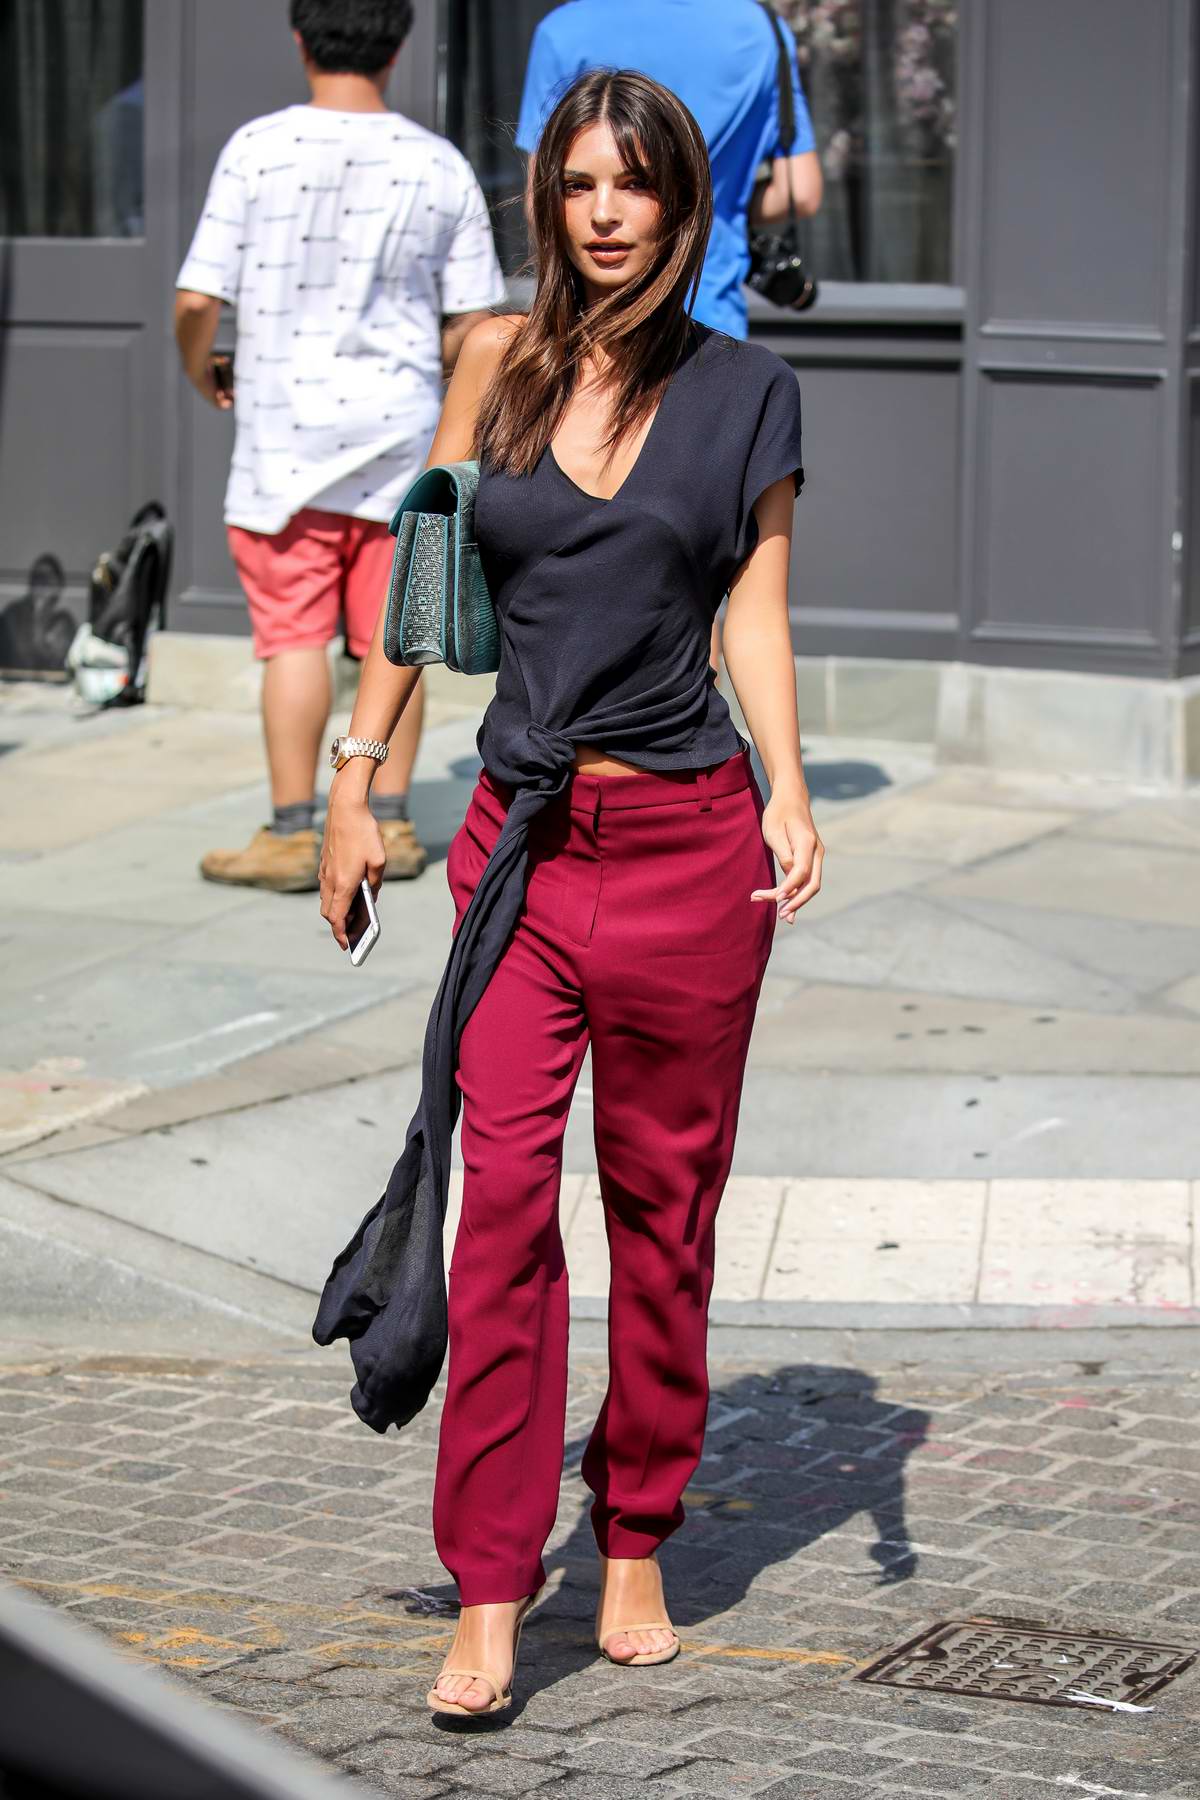 Emily Ratajkowski wears a navy blue top with dark pink pants as she heads  to a